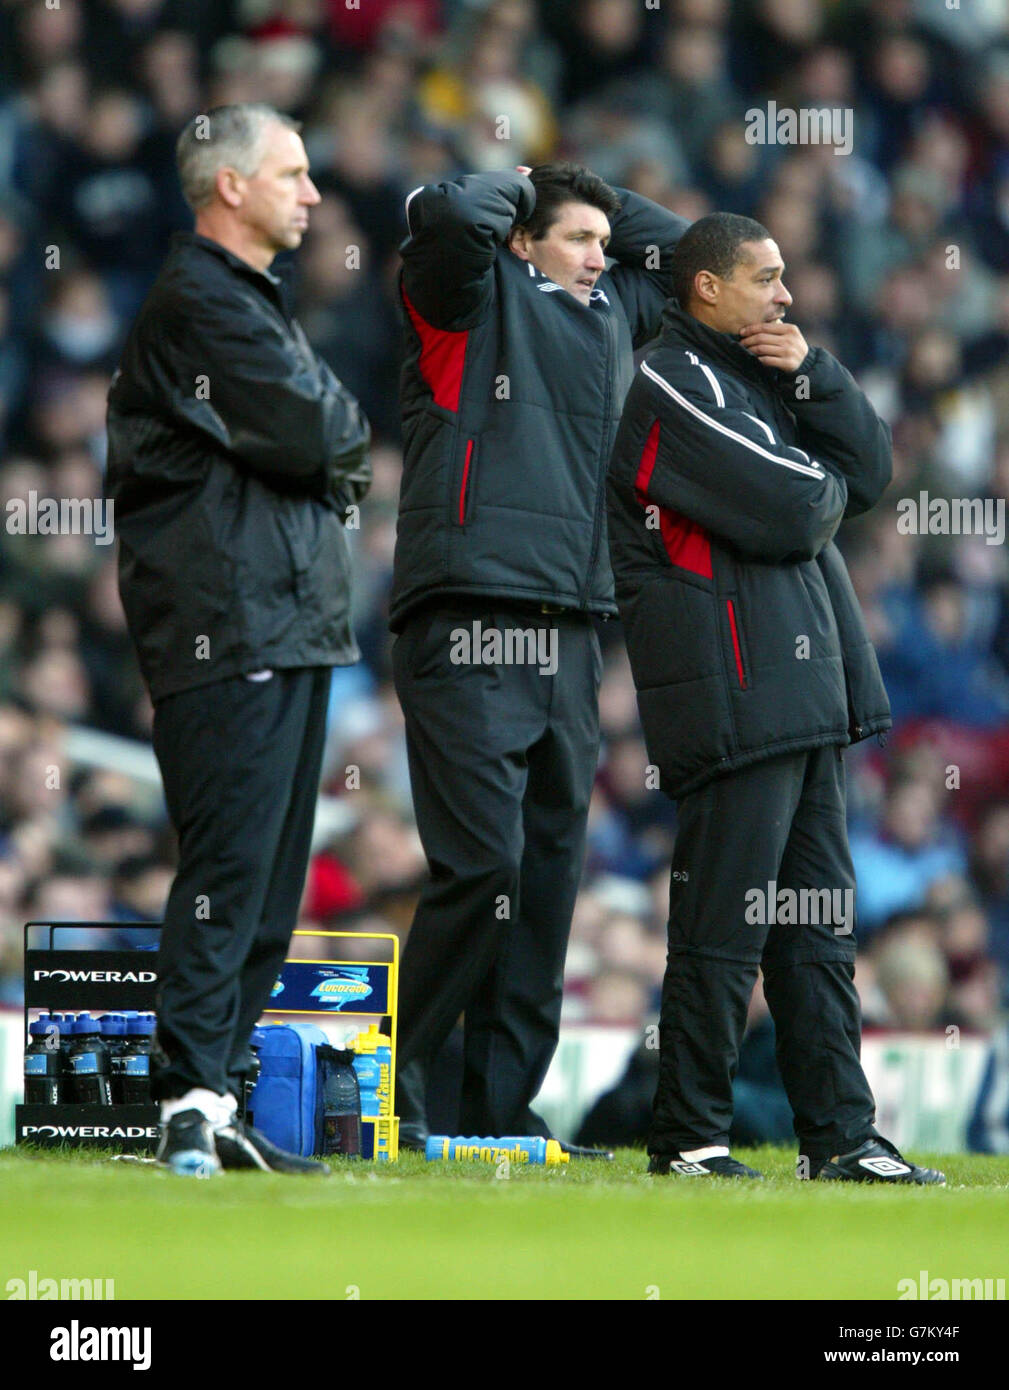 Nottingham Forest's caretaker manager Mick Harford (c) and coach Des Walker (r) stand dejected during the defeat against West Ham United Stock Photo